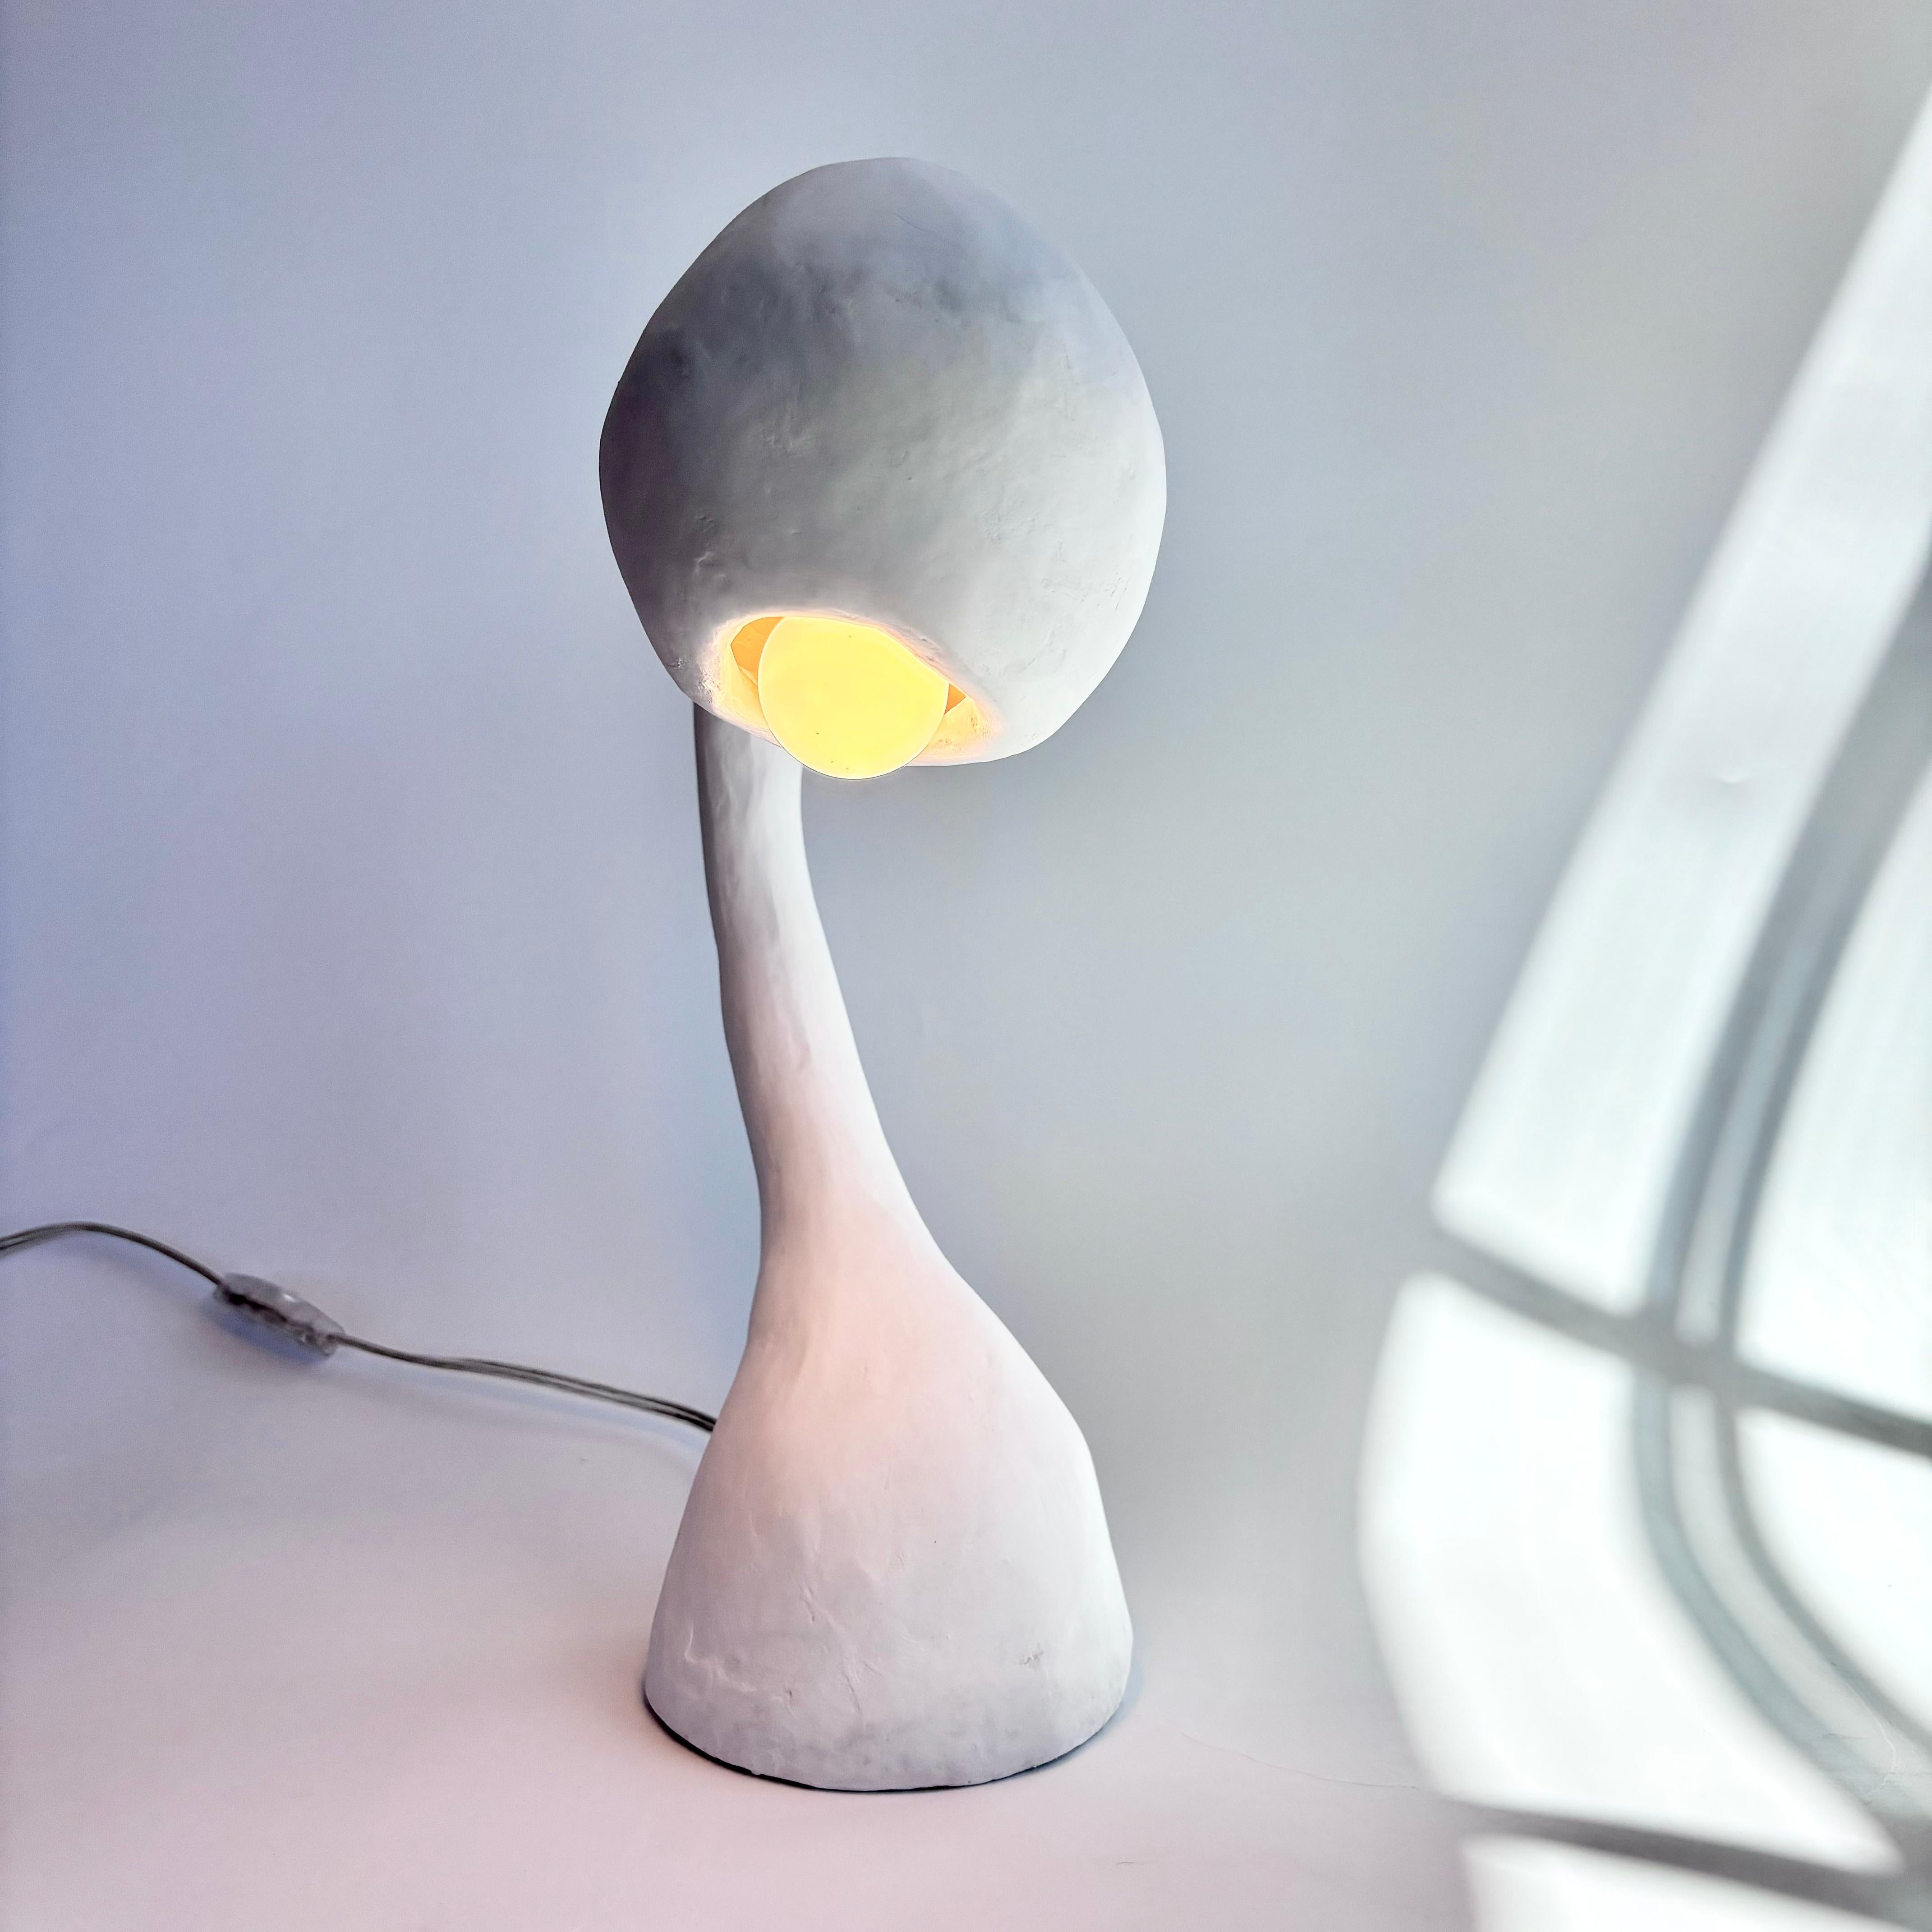 Biomorphic Line by Studio Chora, Task Table Lamp, White Lime Plaster, In Stock In New Condition For Sale In Albuquerque, NM